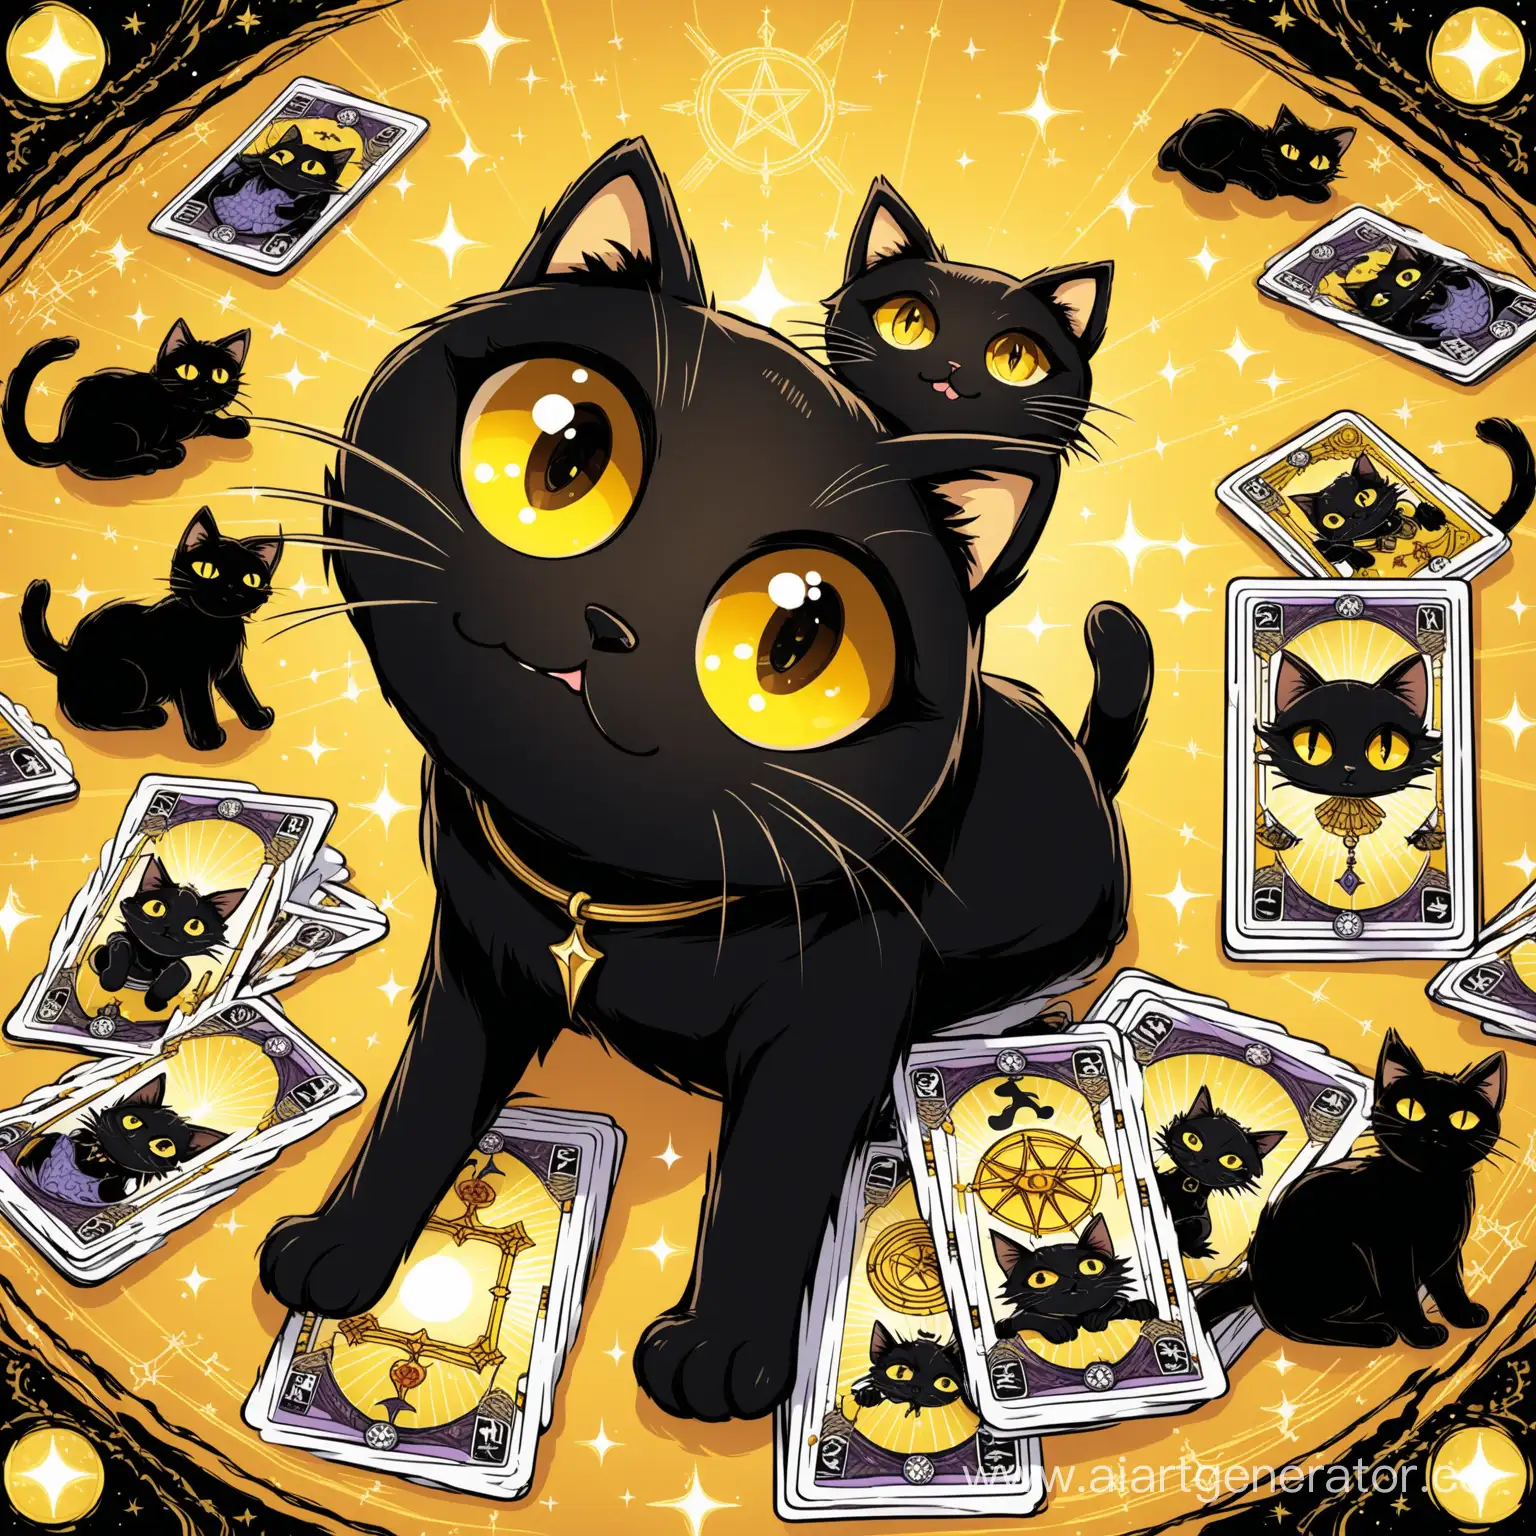 Mystical-Tarot-Cards-with-Black-Cats-and-Yellow-Eyes